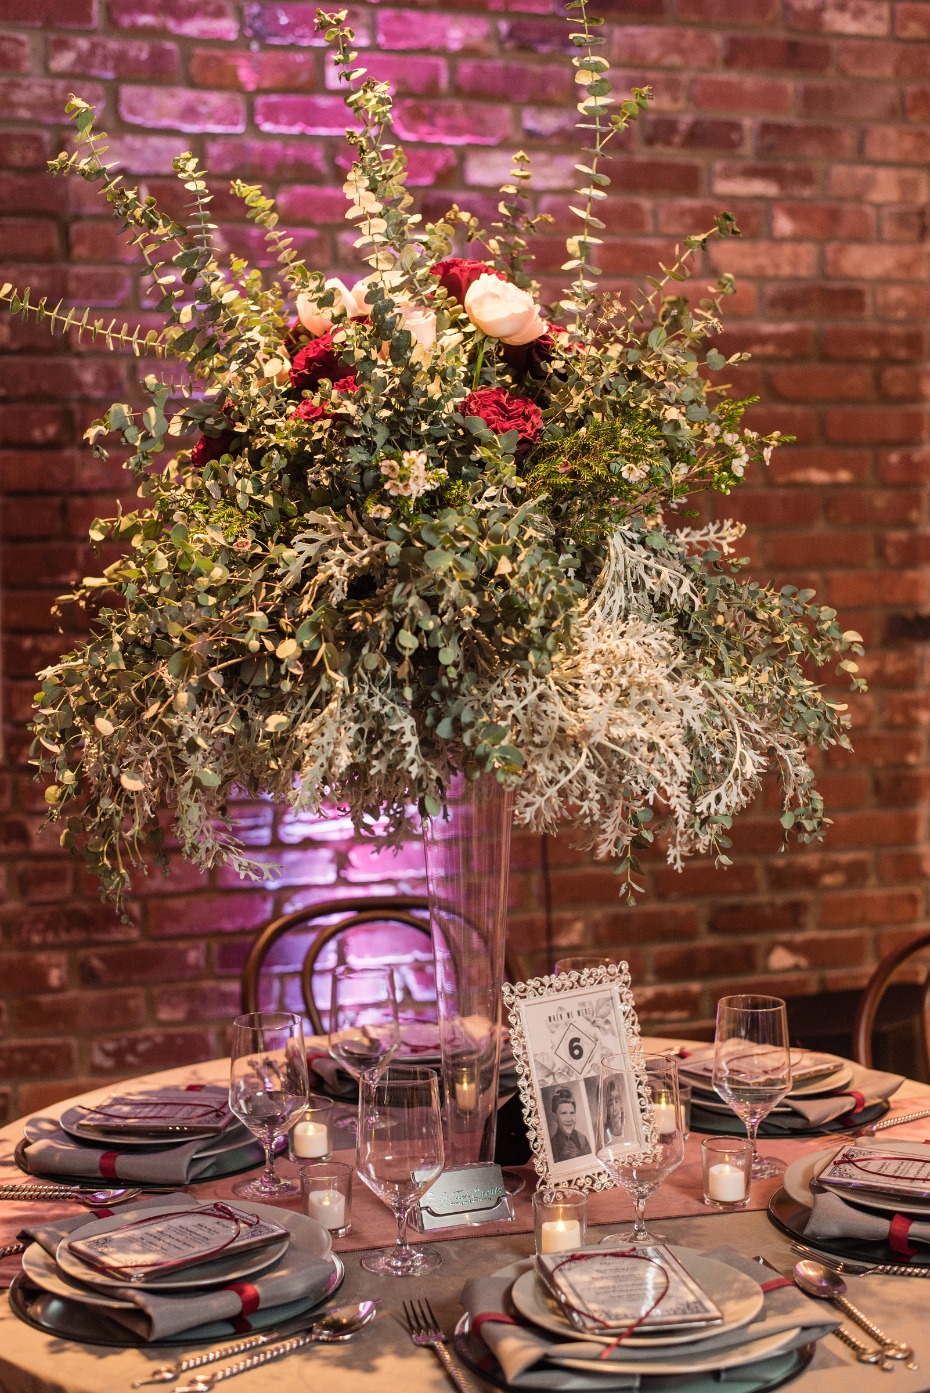 overgrown centerpiece floating above the table